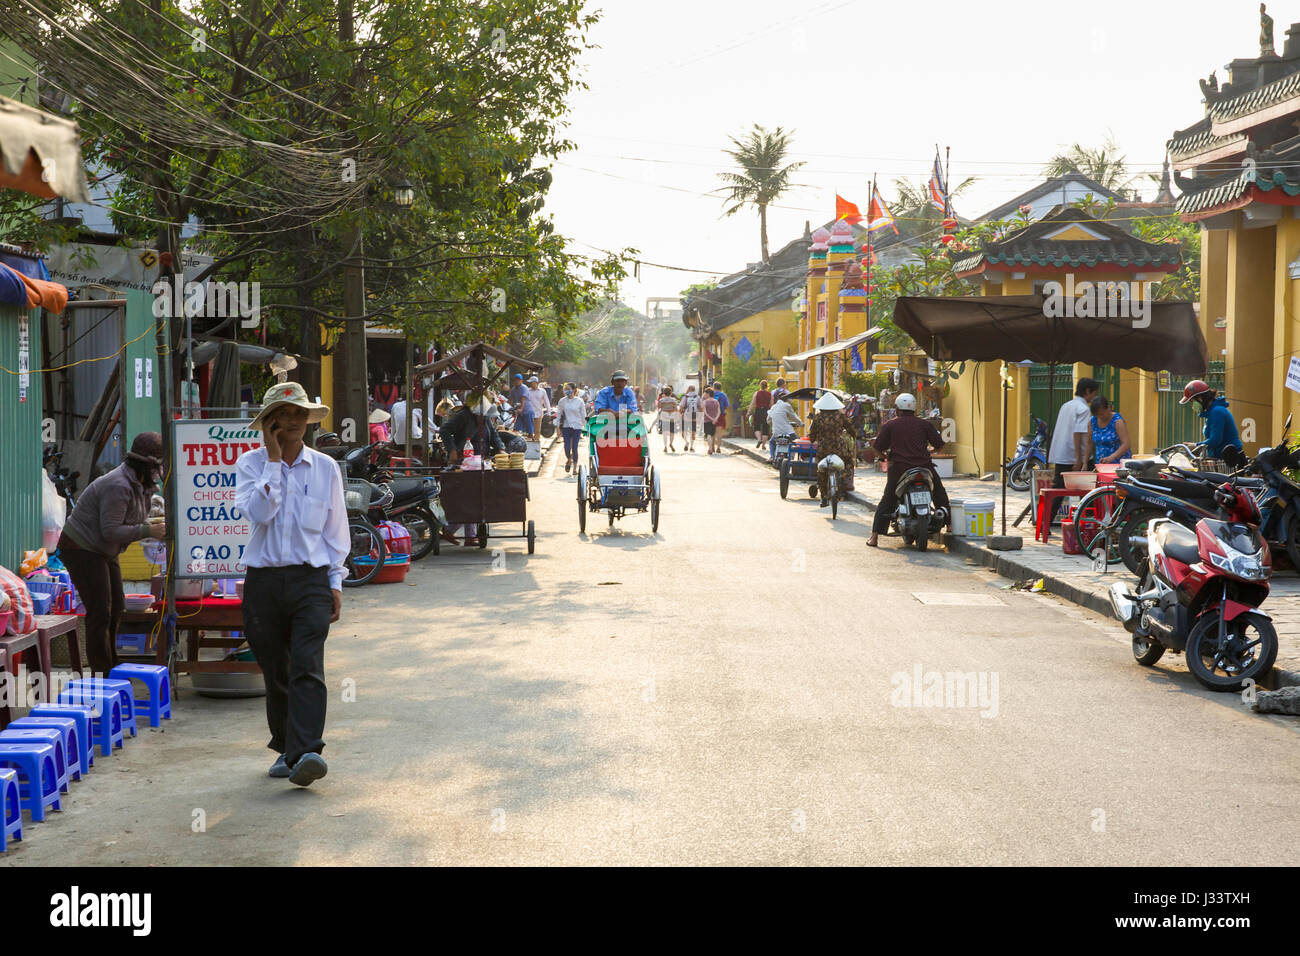 HOI AN, VIETNAM - MARCH 13: People on the street of Hoi An ancient town, UNESCO World Heritage Site on March 13, 2014 in Hoi An, Vietnam. Stock Photo